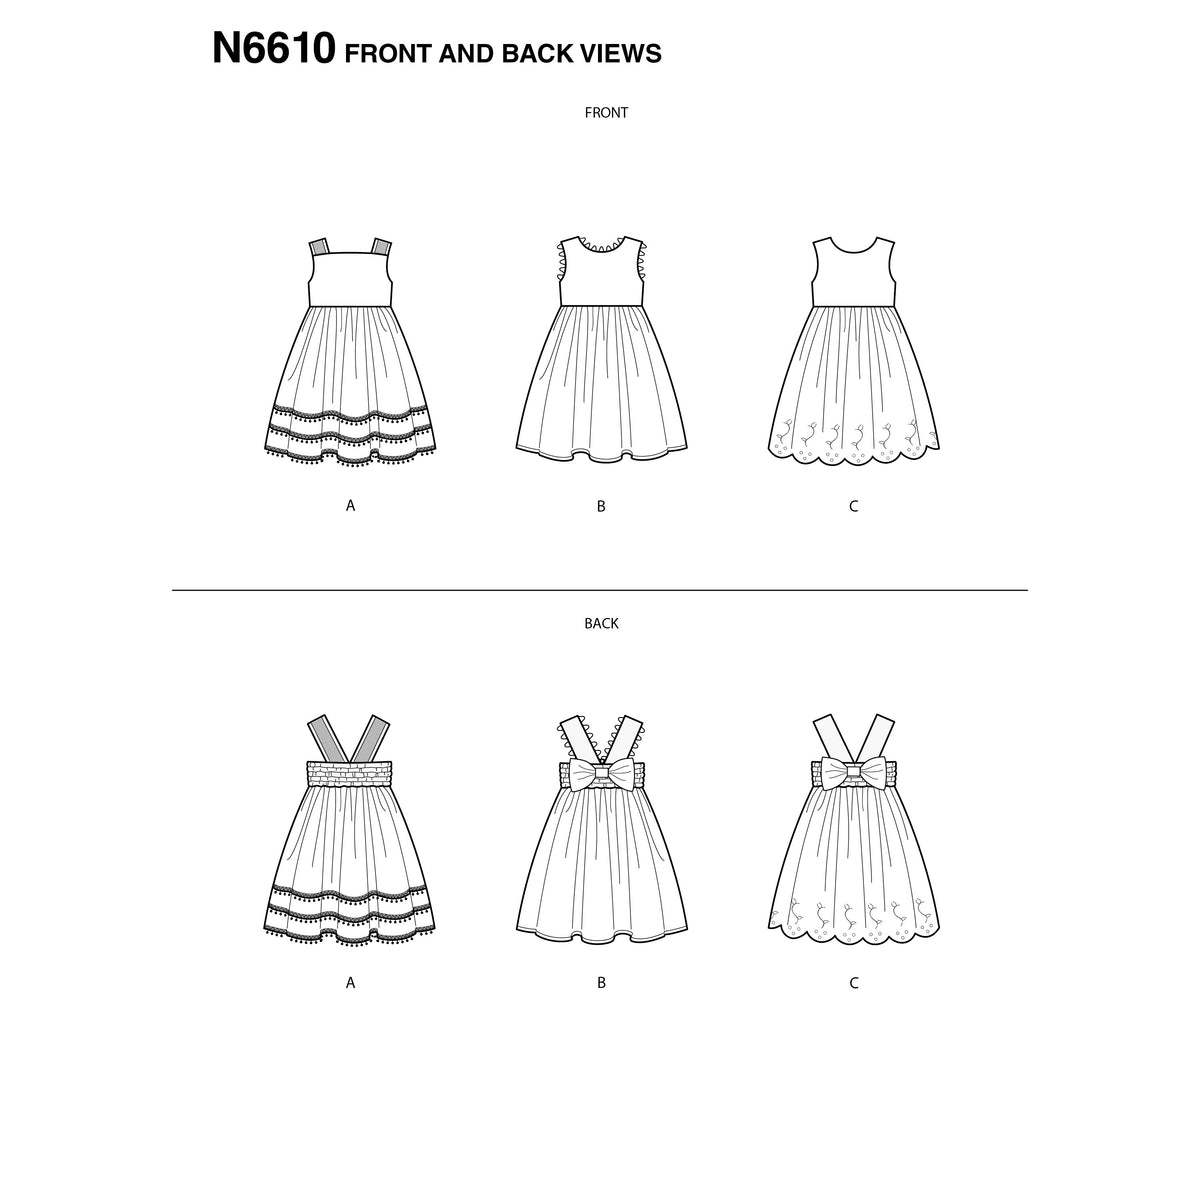 6610 New Look Sewing Pattern N6610 Toddlers' Dress